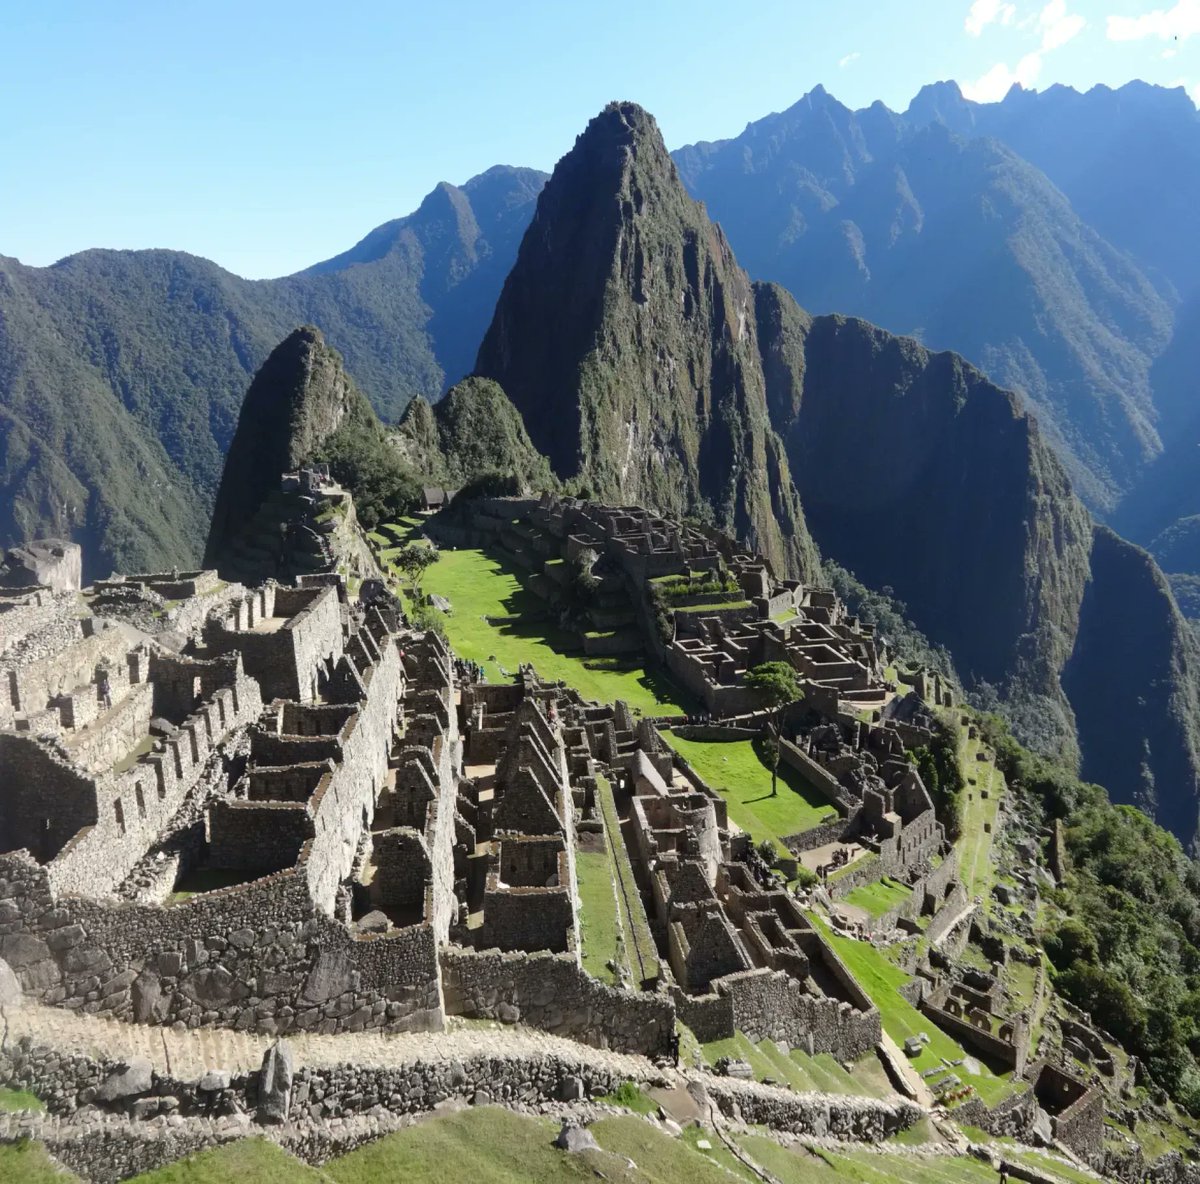 TRIP OF A LIFTIME - Peru Machu Picchu Trek
9th - 18th October 2024
Voted one of the top 25 treks in the world, this challenging expedition will take you beneath spectacular Andean peaks, through epic Peruvian landscapes and misty cloud forest.
 
https://t.co/cswmy7Qytb https://t.co/Kr3zKyZjBM